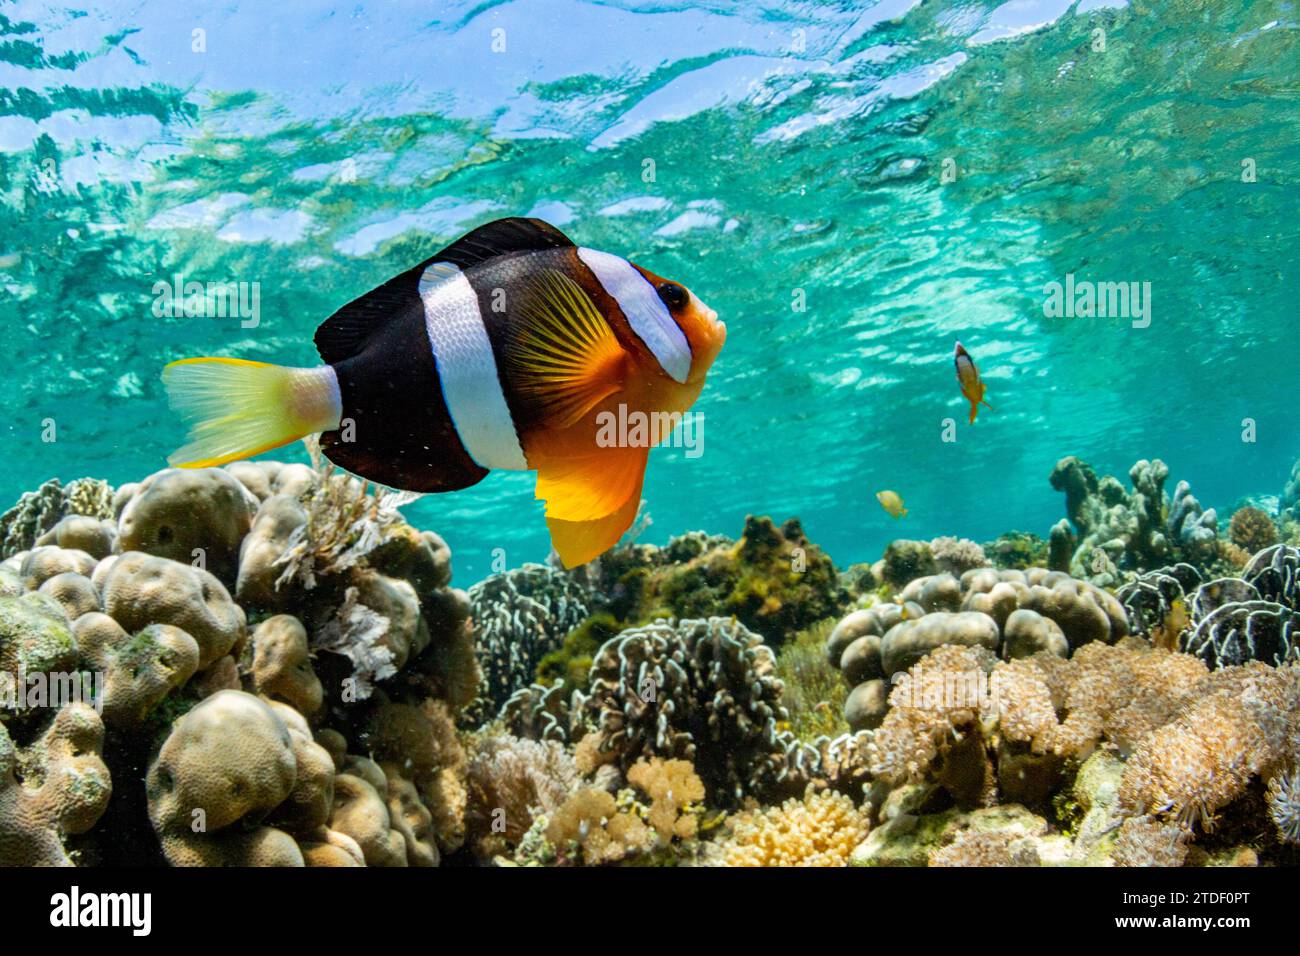 An adult Clarks anemonefish (Amphiprion clarkii), swimming over the reef near Bangka Island, Indonesia, Southeast Asia, Asia Stock Photo